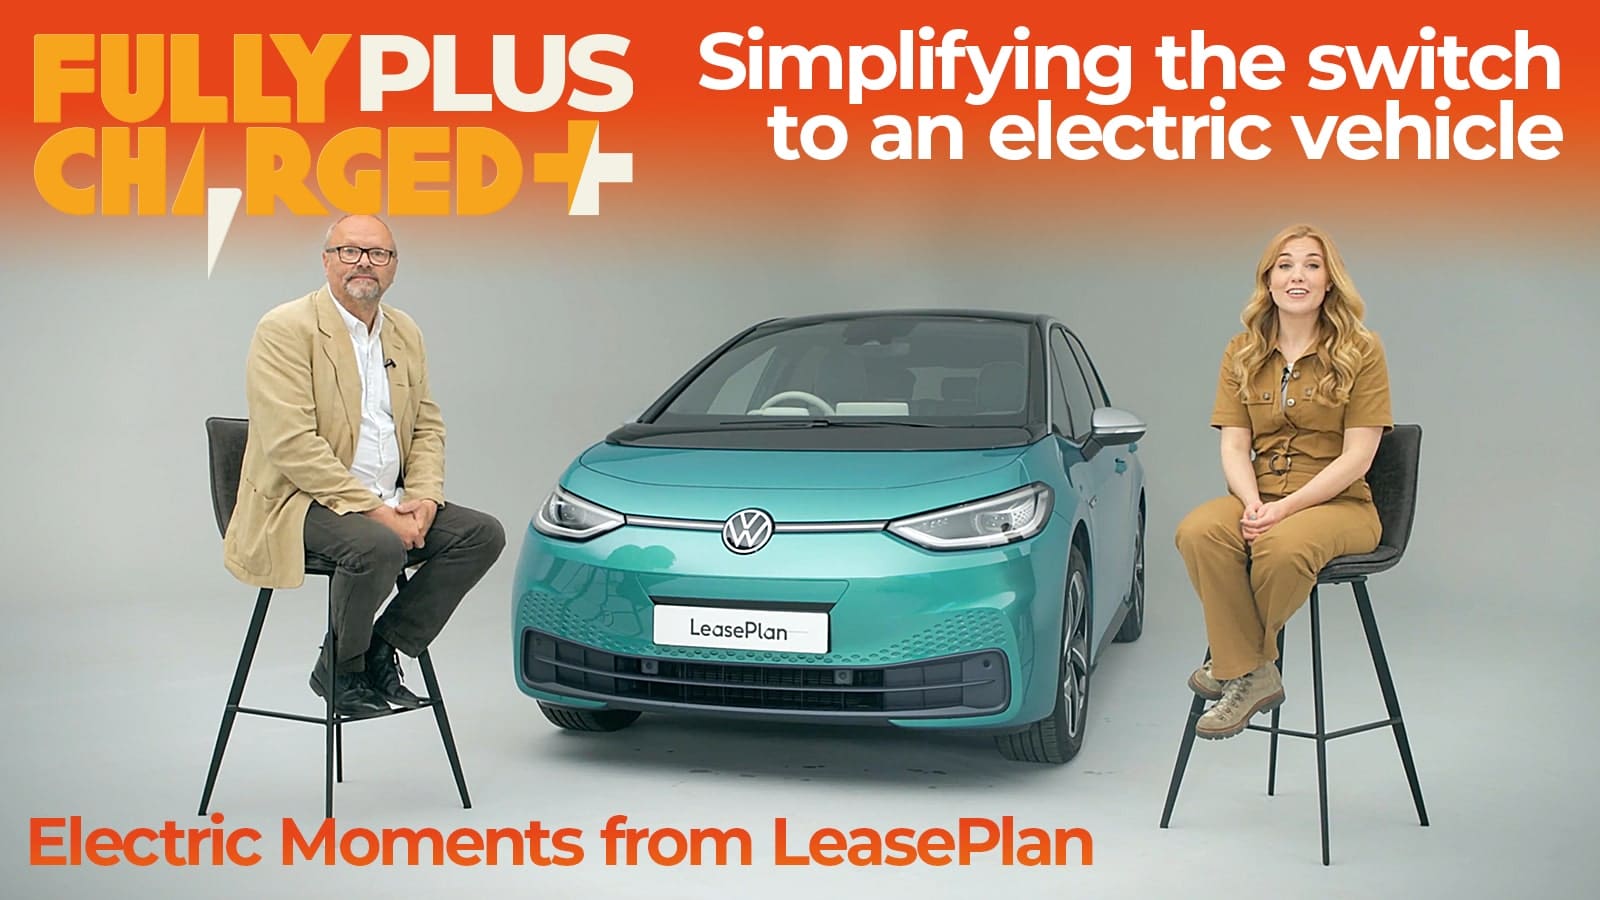 LeasePlan Electric Moments - Episode One - Simplifying the switch to an electric vehicle